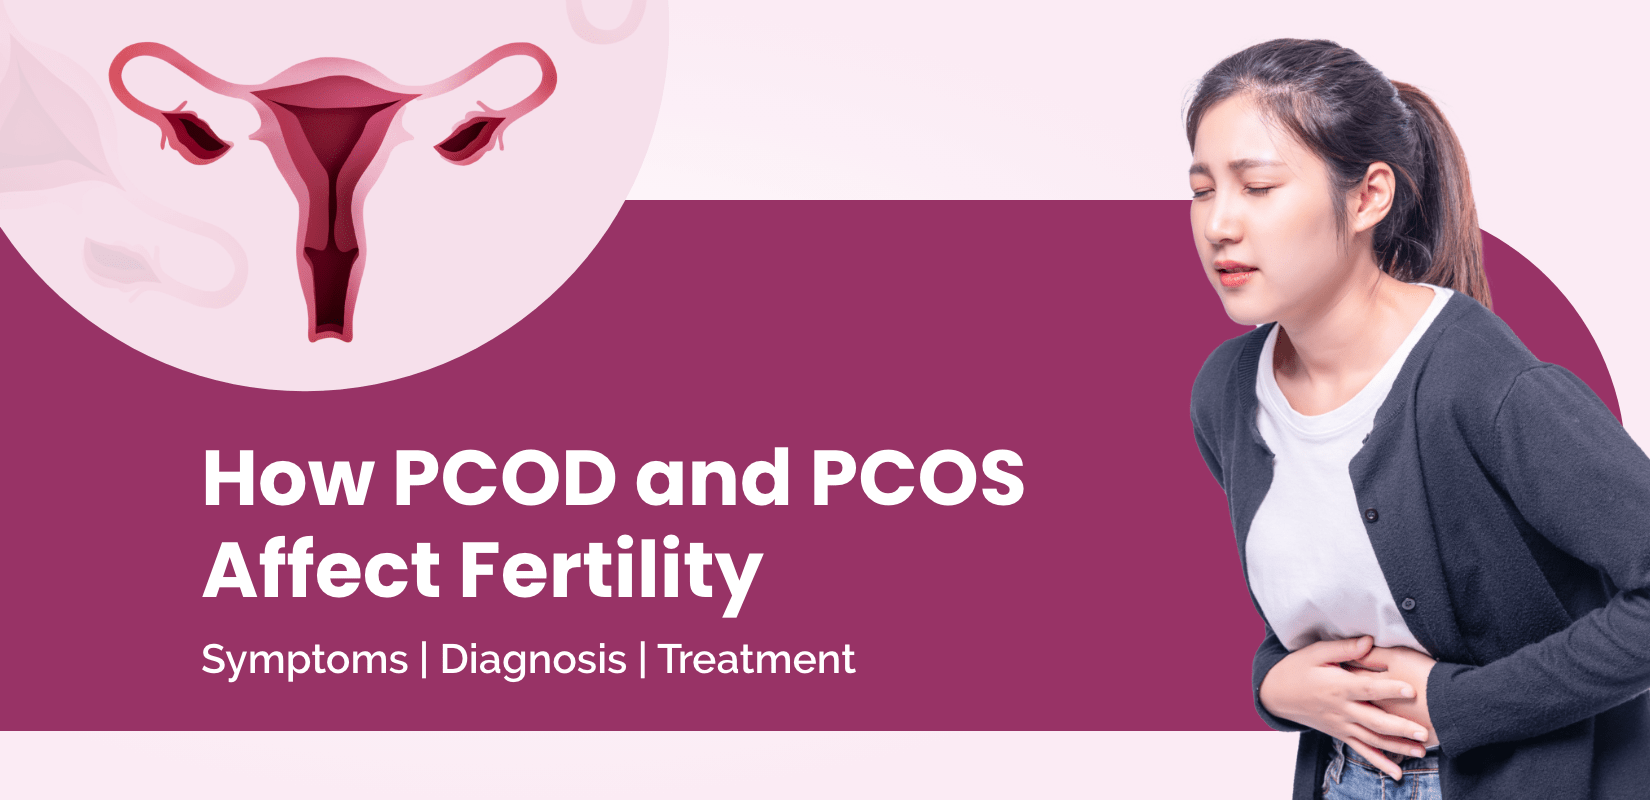 How PCOD and PCOS Affect Fertility 